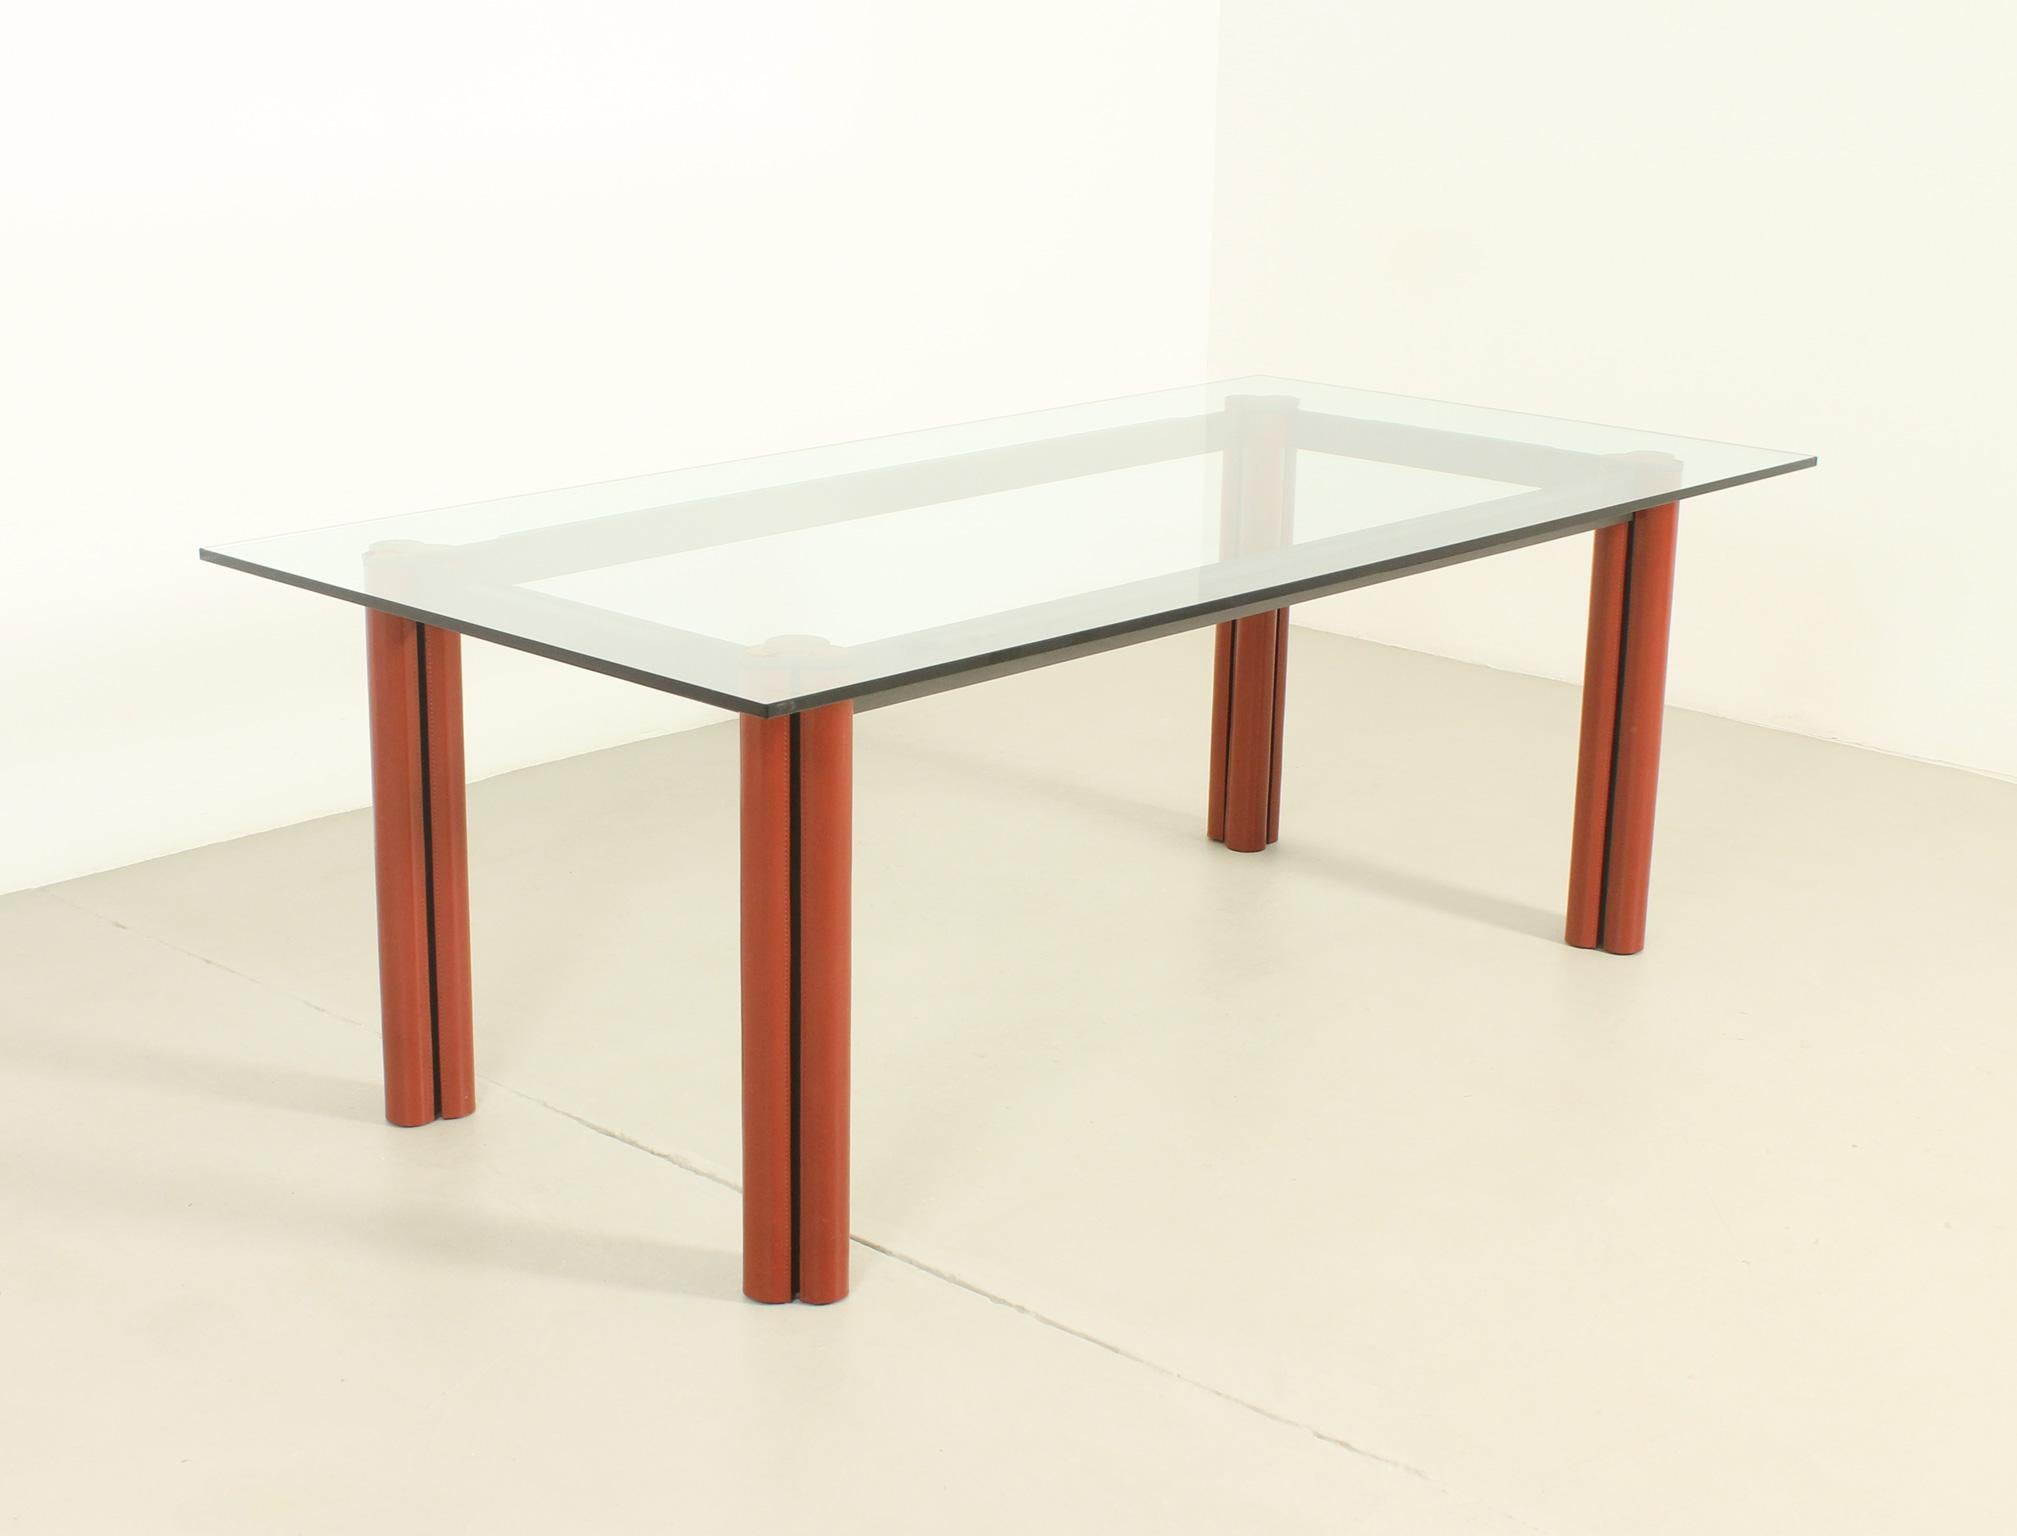 Mugello dining table designed in 1987 by Lodovico Acerbis and Giotto Stoppino for Acerbis International, Italy. Lacquered iron structure with aluminum legs sheathed with leather covers and a clear glass top. 